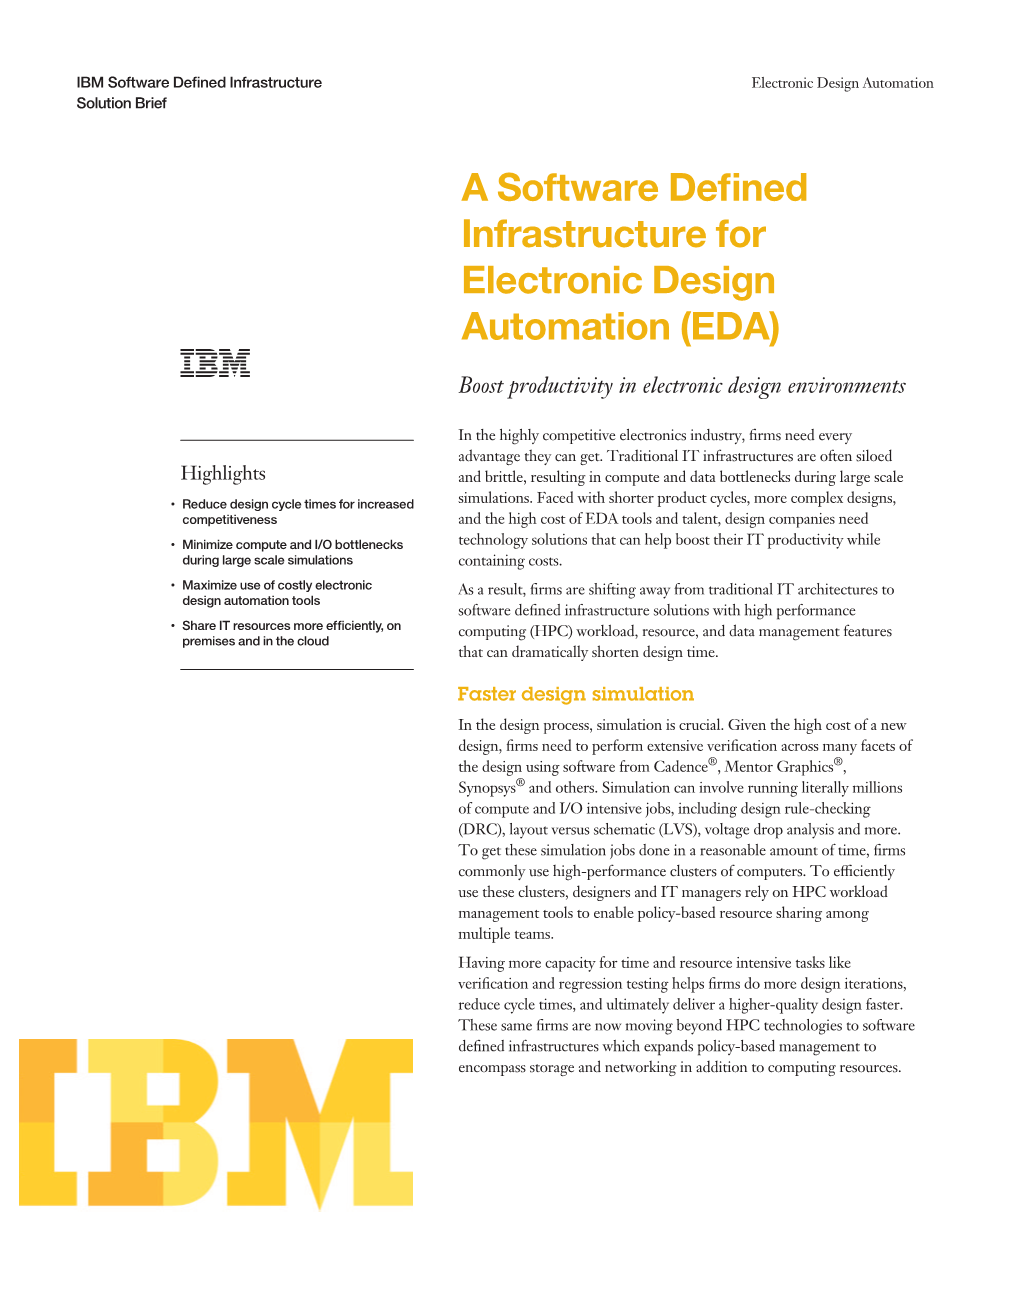 A Software Defined Infrastructure for Electronic Design Automation (EDA)